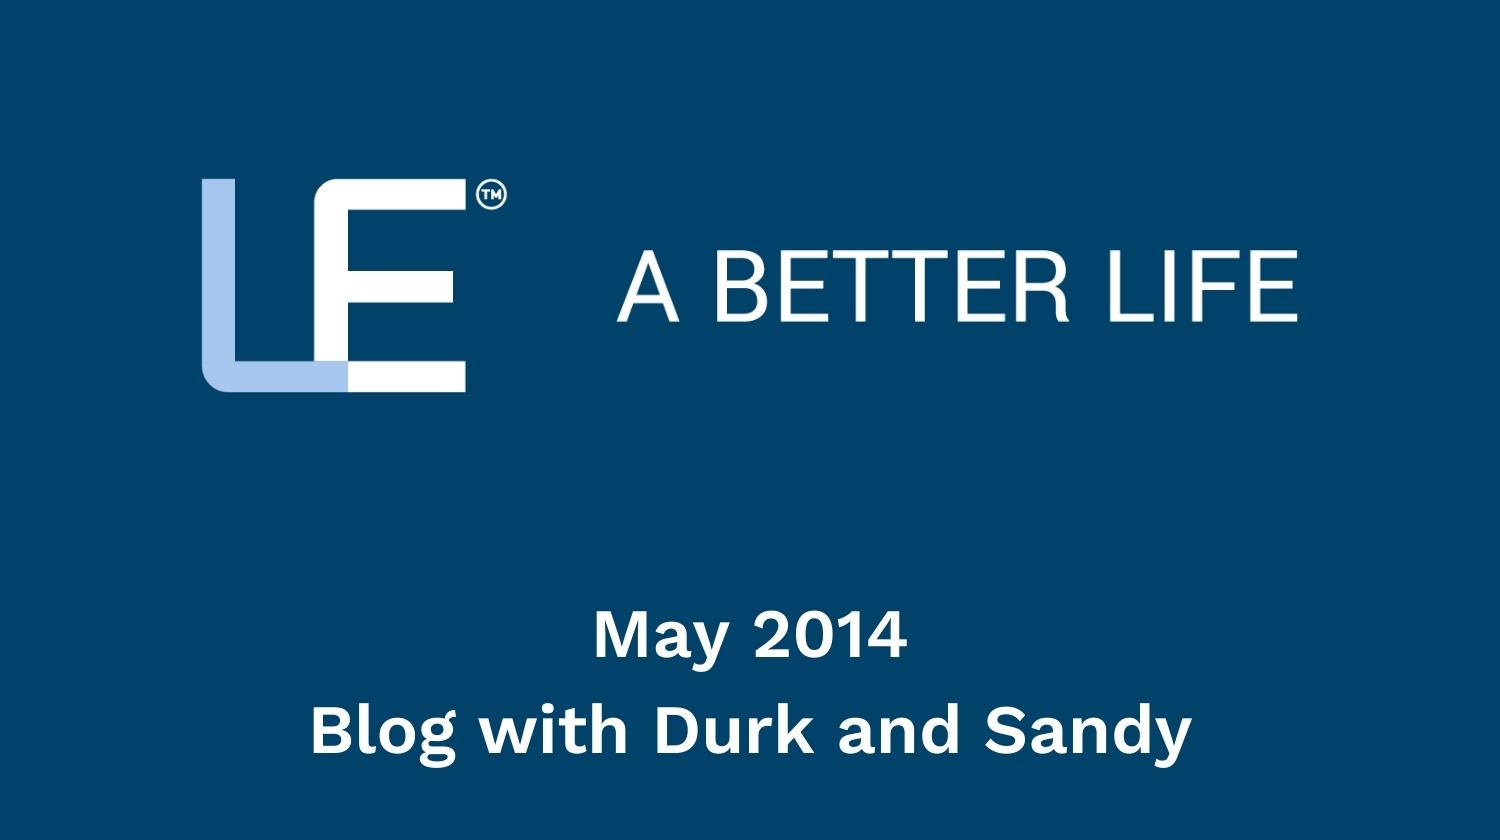 May 2014 Blog with Durk and Sandy